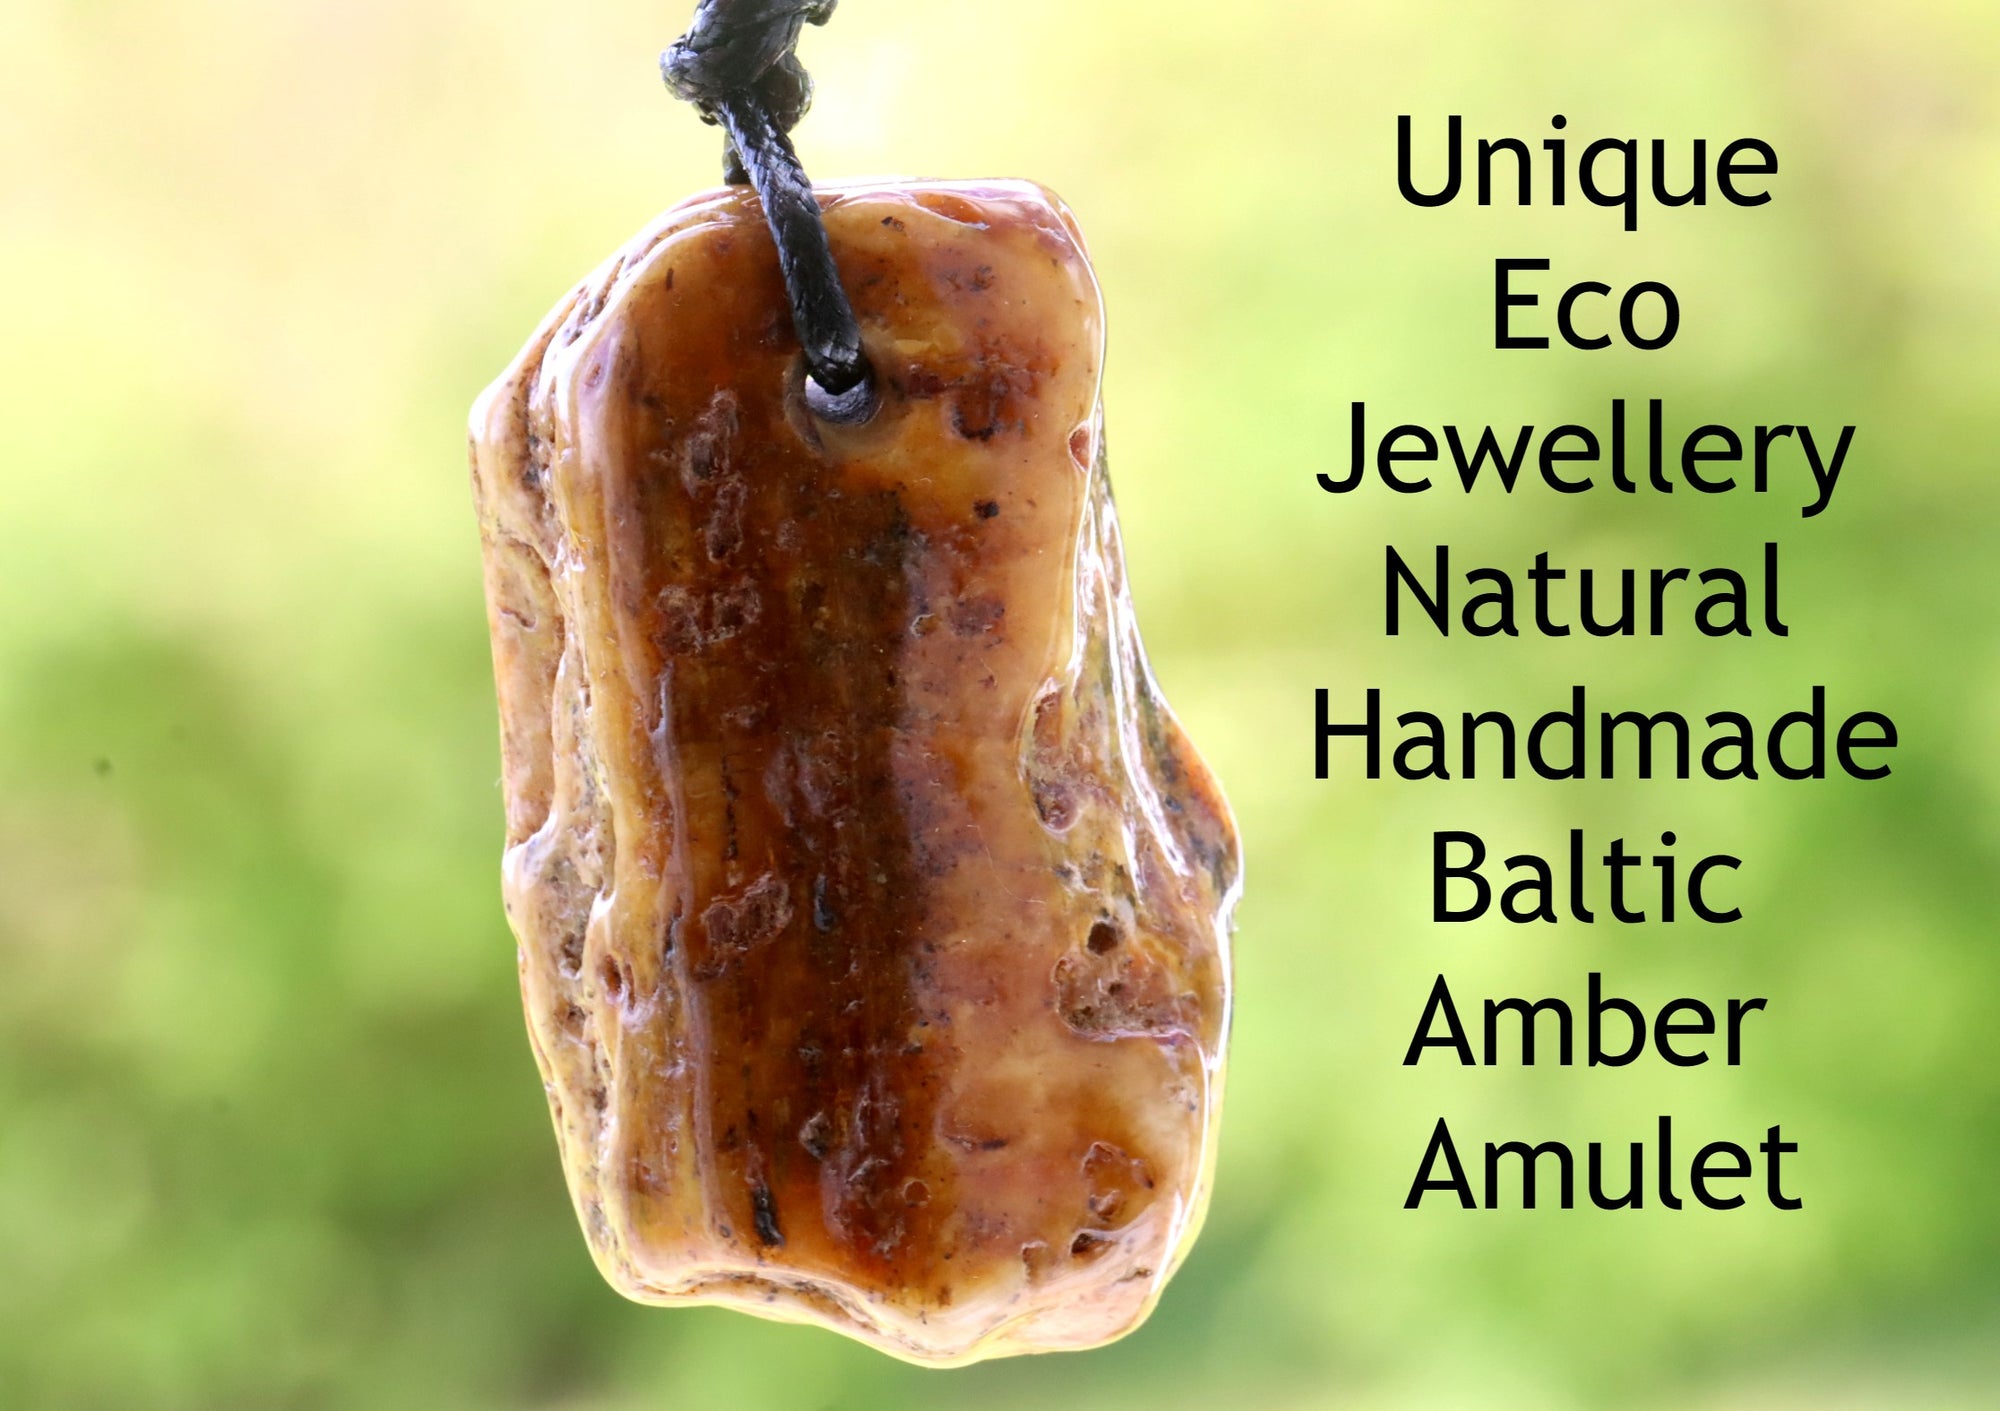 Unique Eco Jewellery Natural Handmade Baltic Amber Amulet